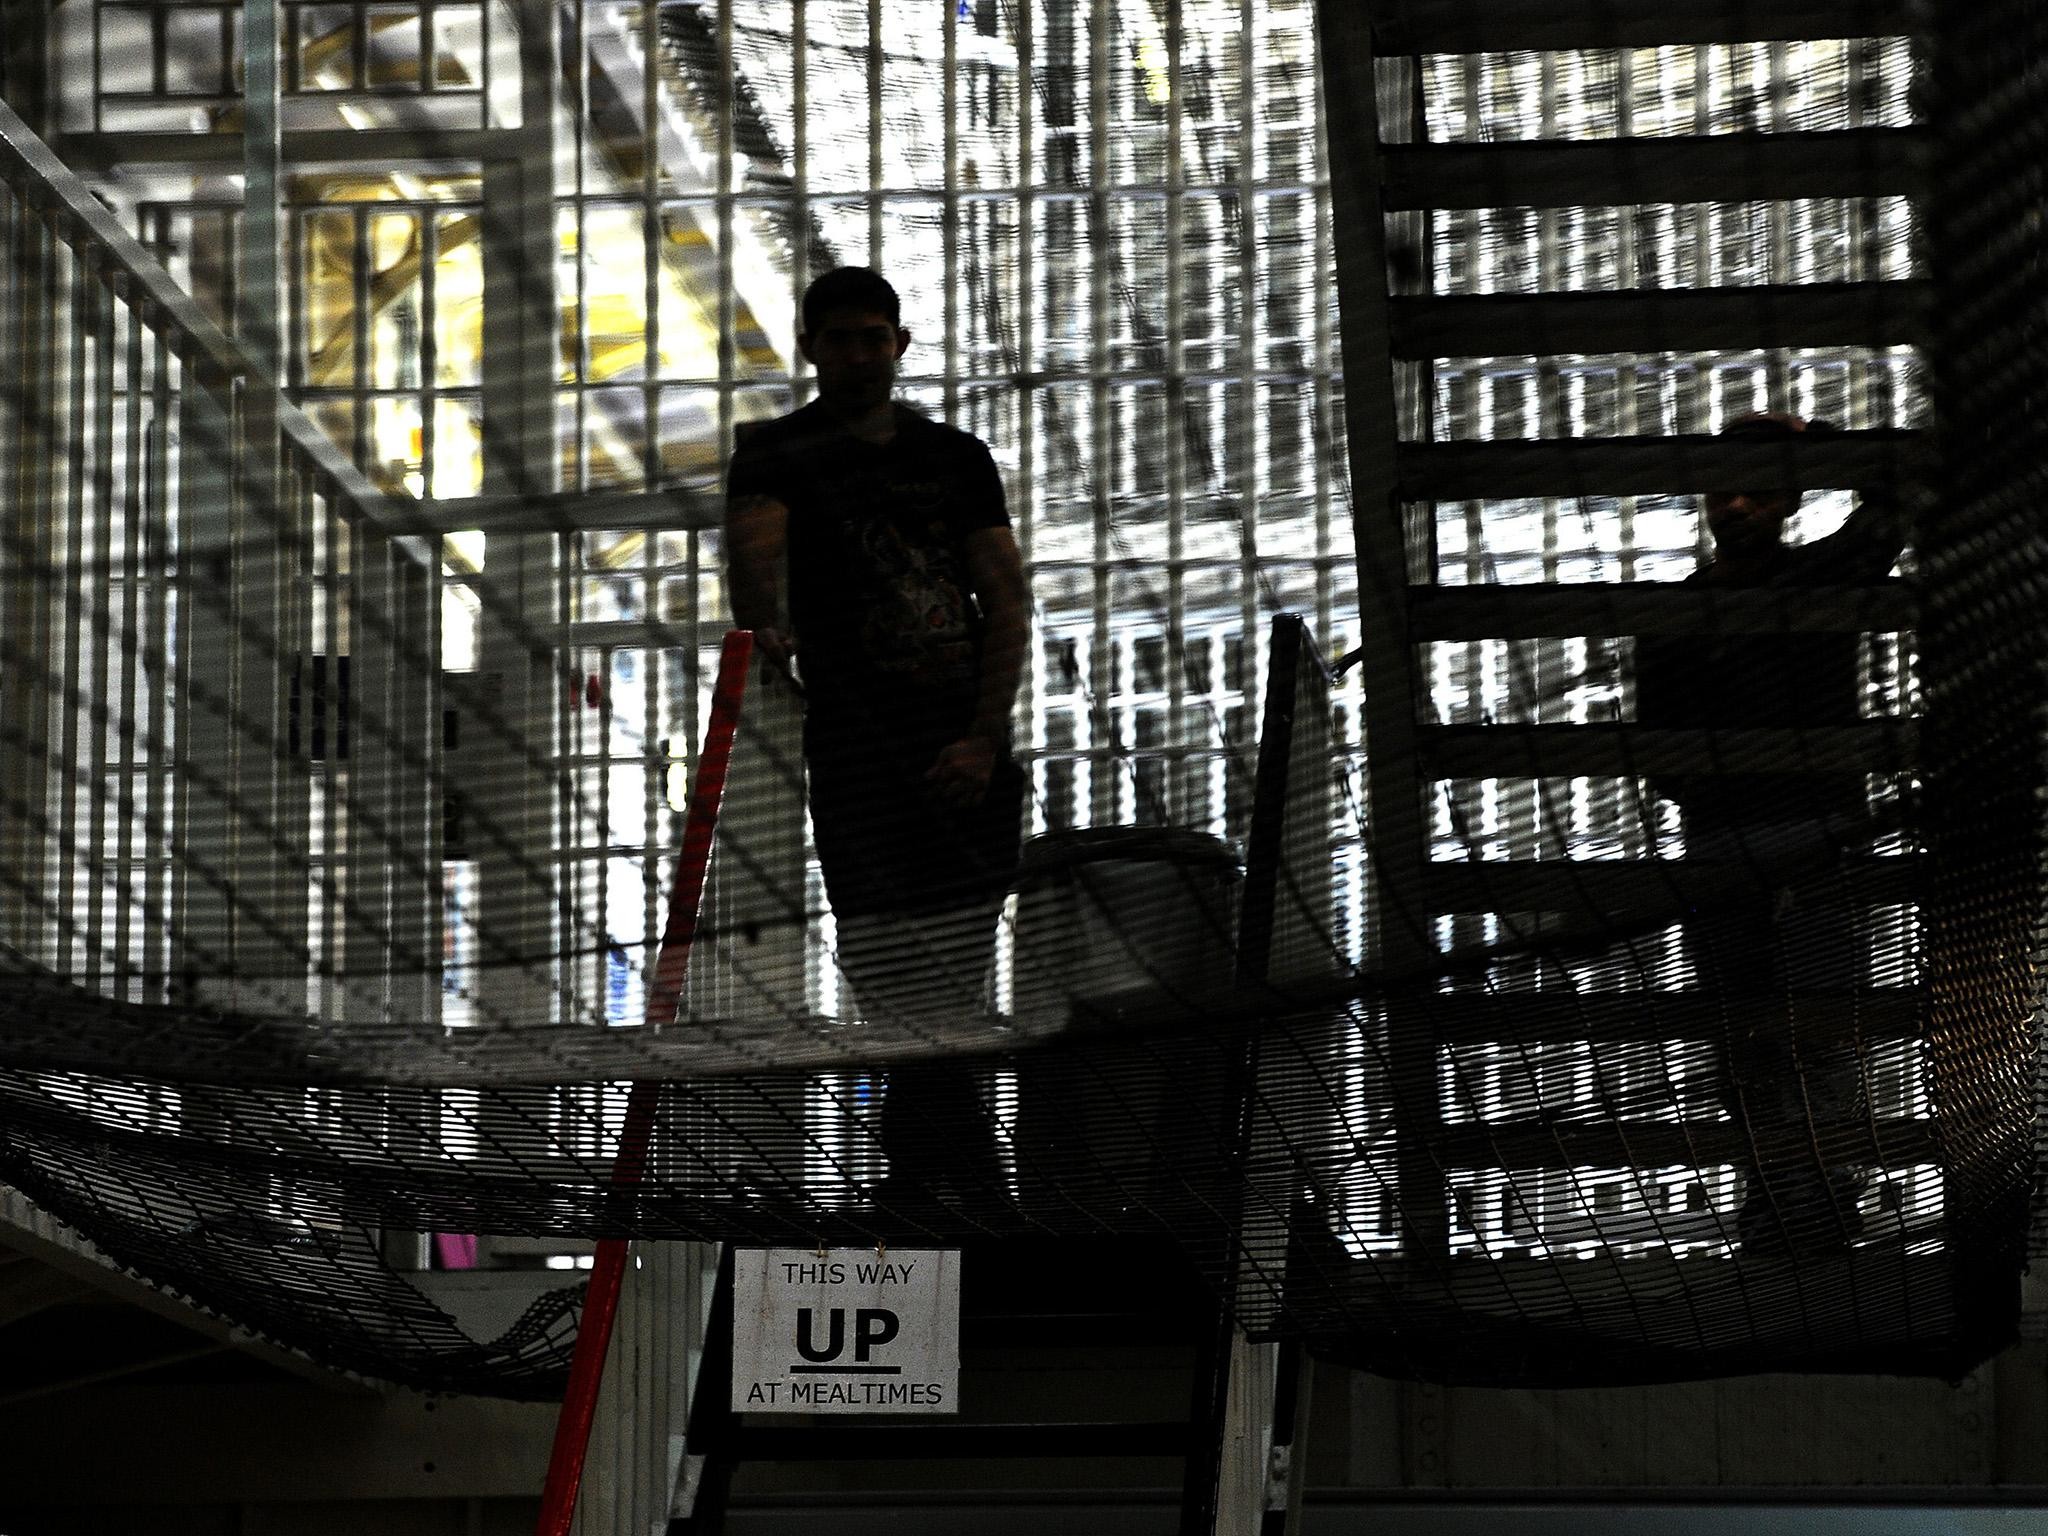 2048x1536 High-security prisoners 'segregated for up to two years', report finds |  The Independent